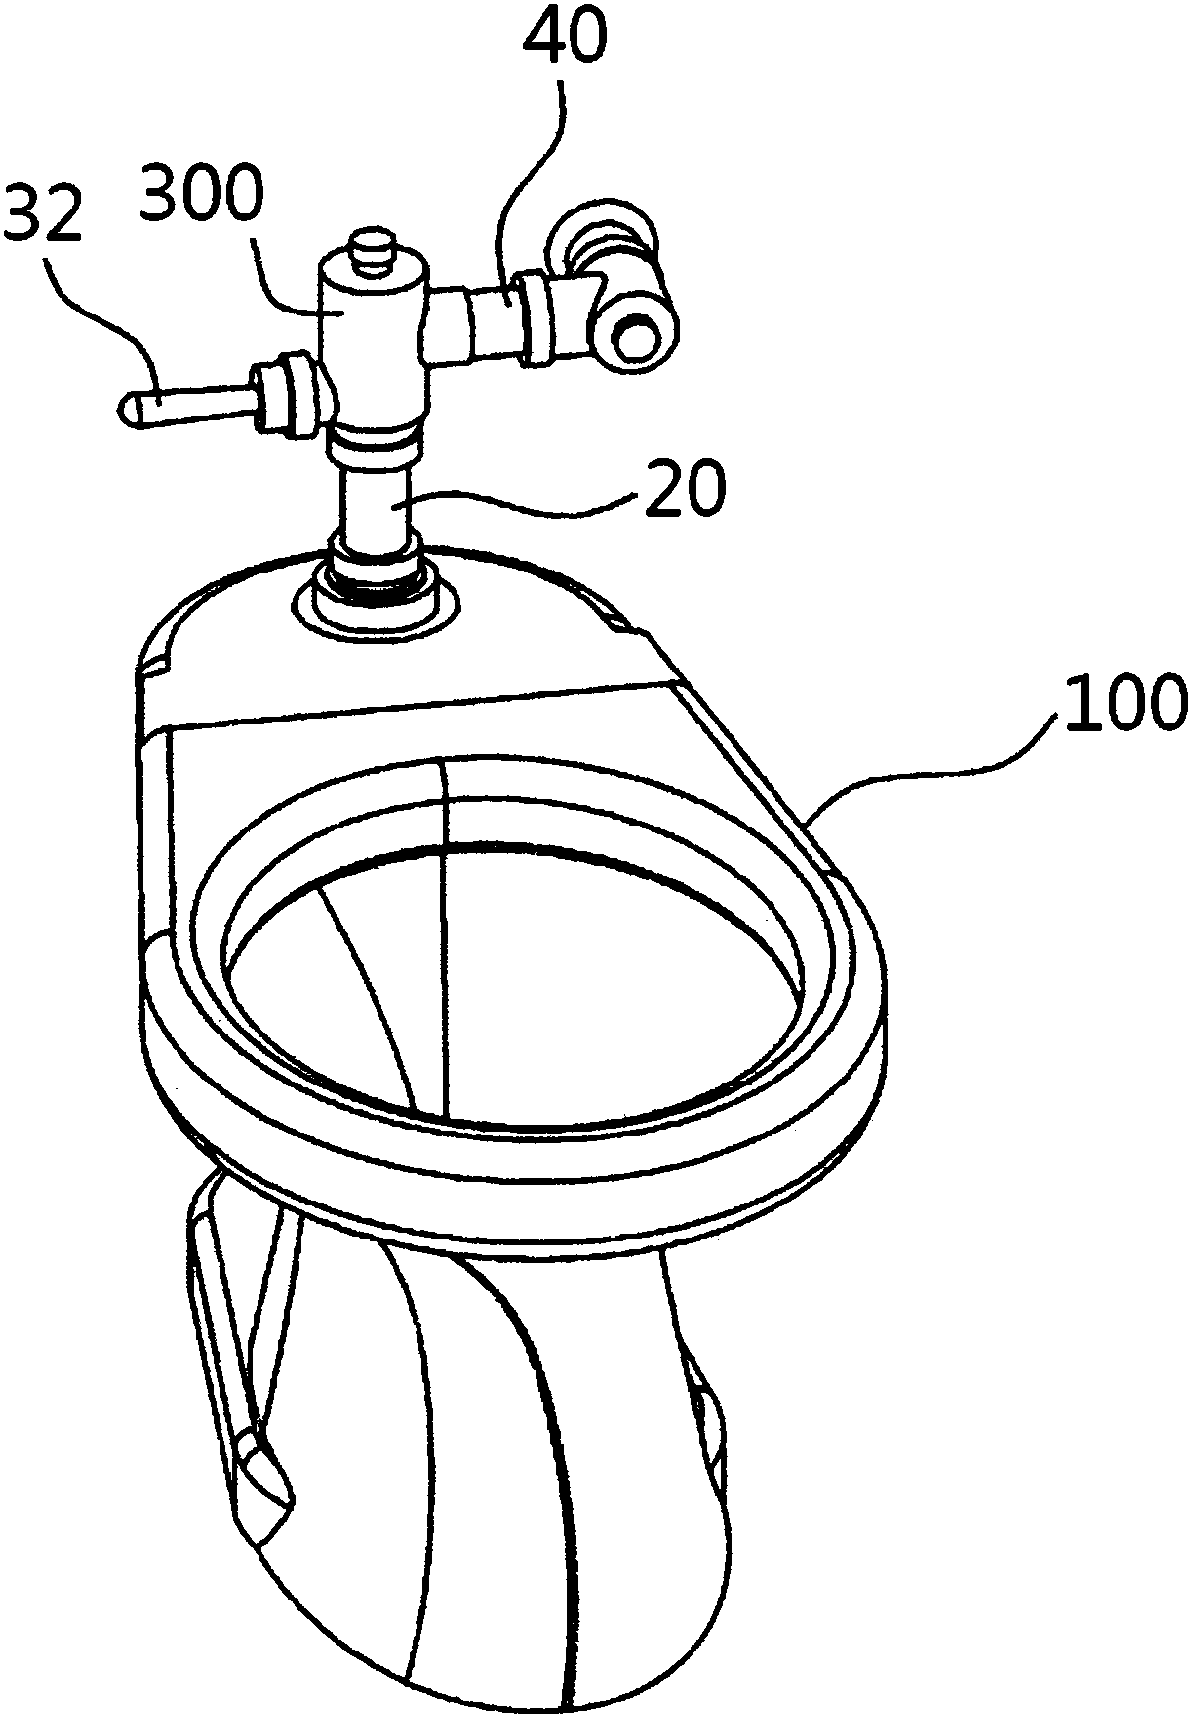 Apparatus for removing bad odor from toilet